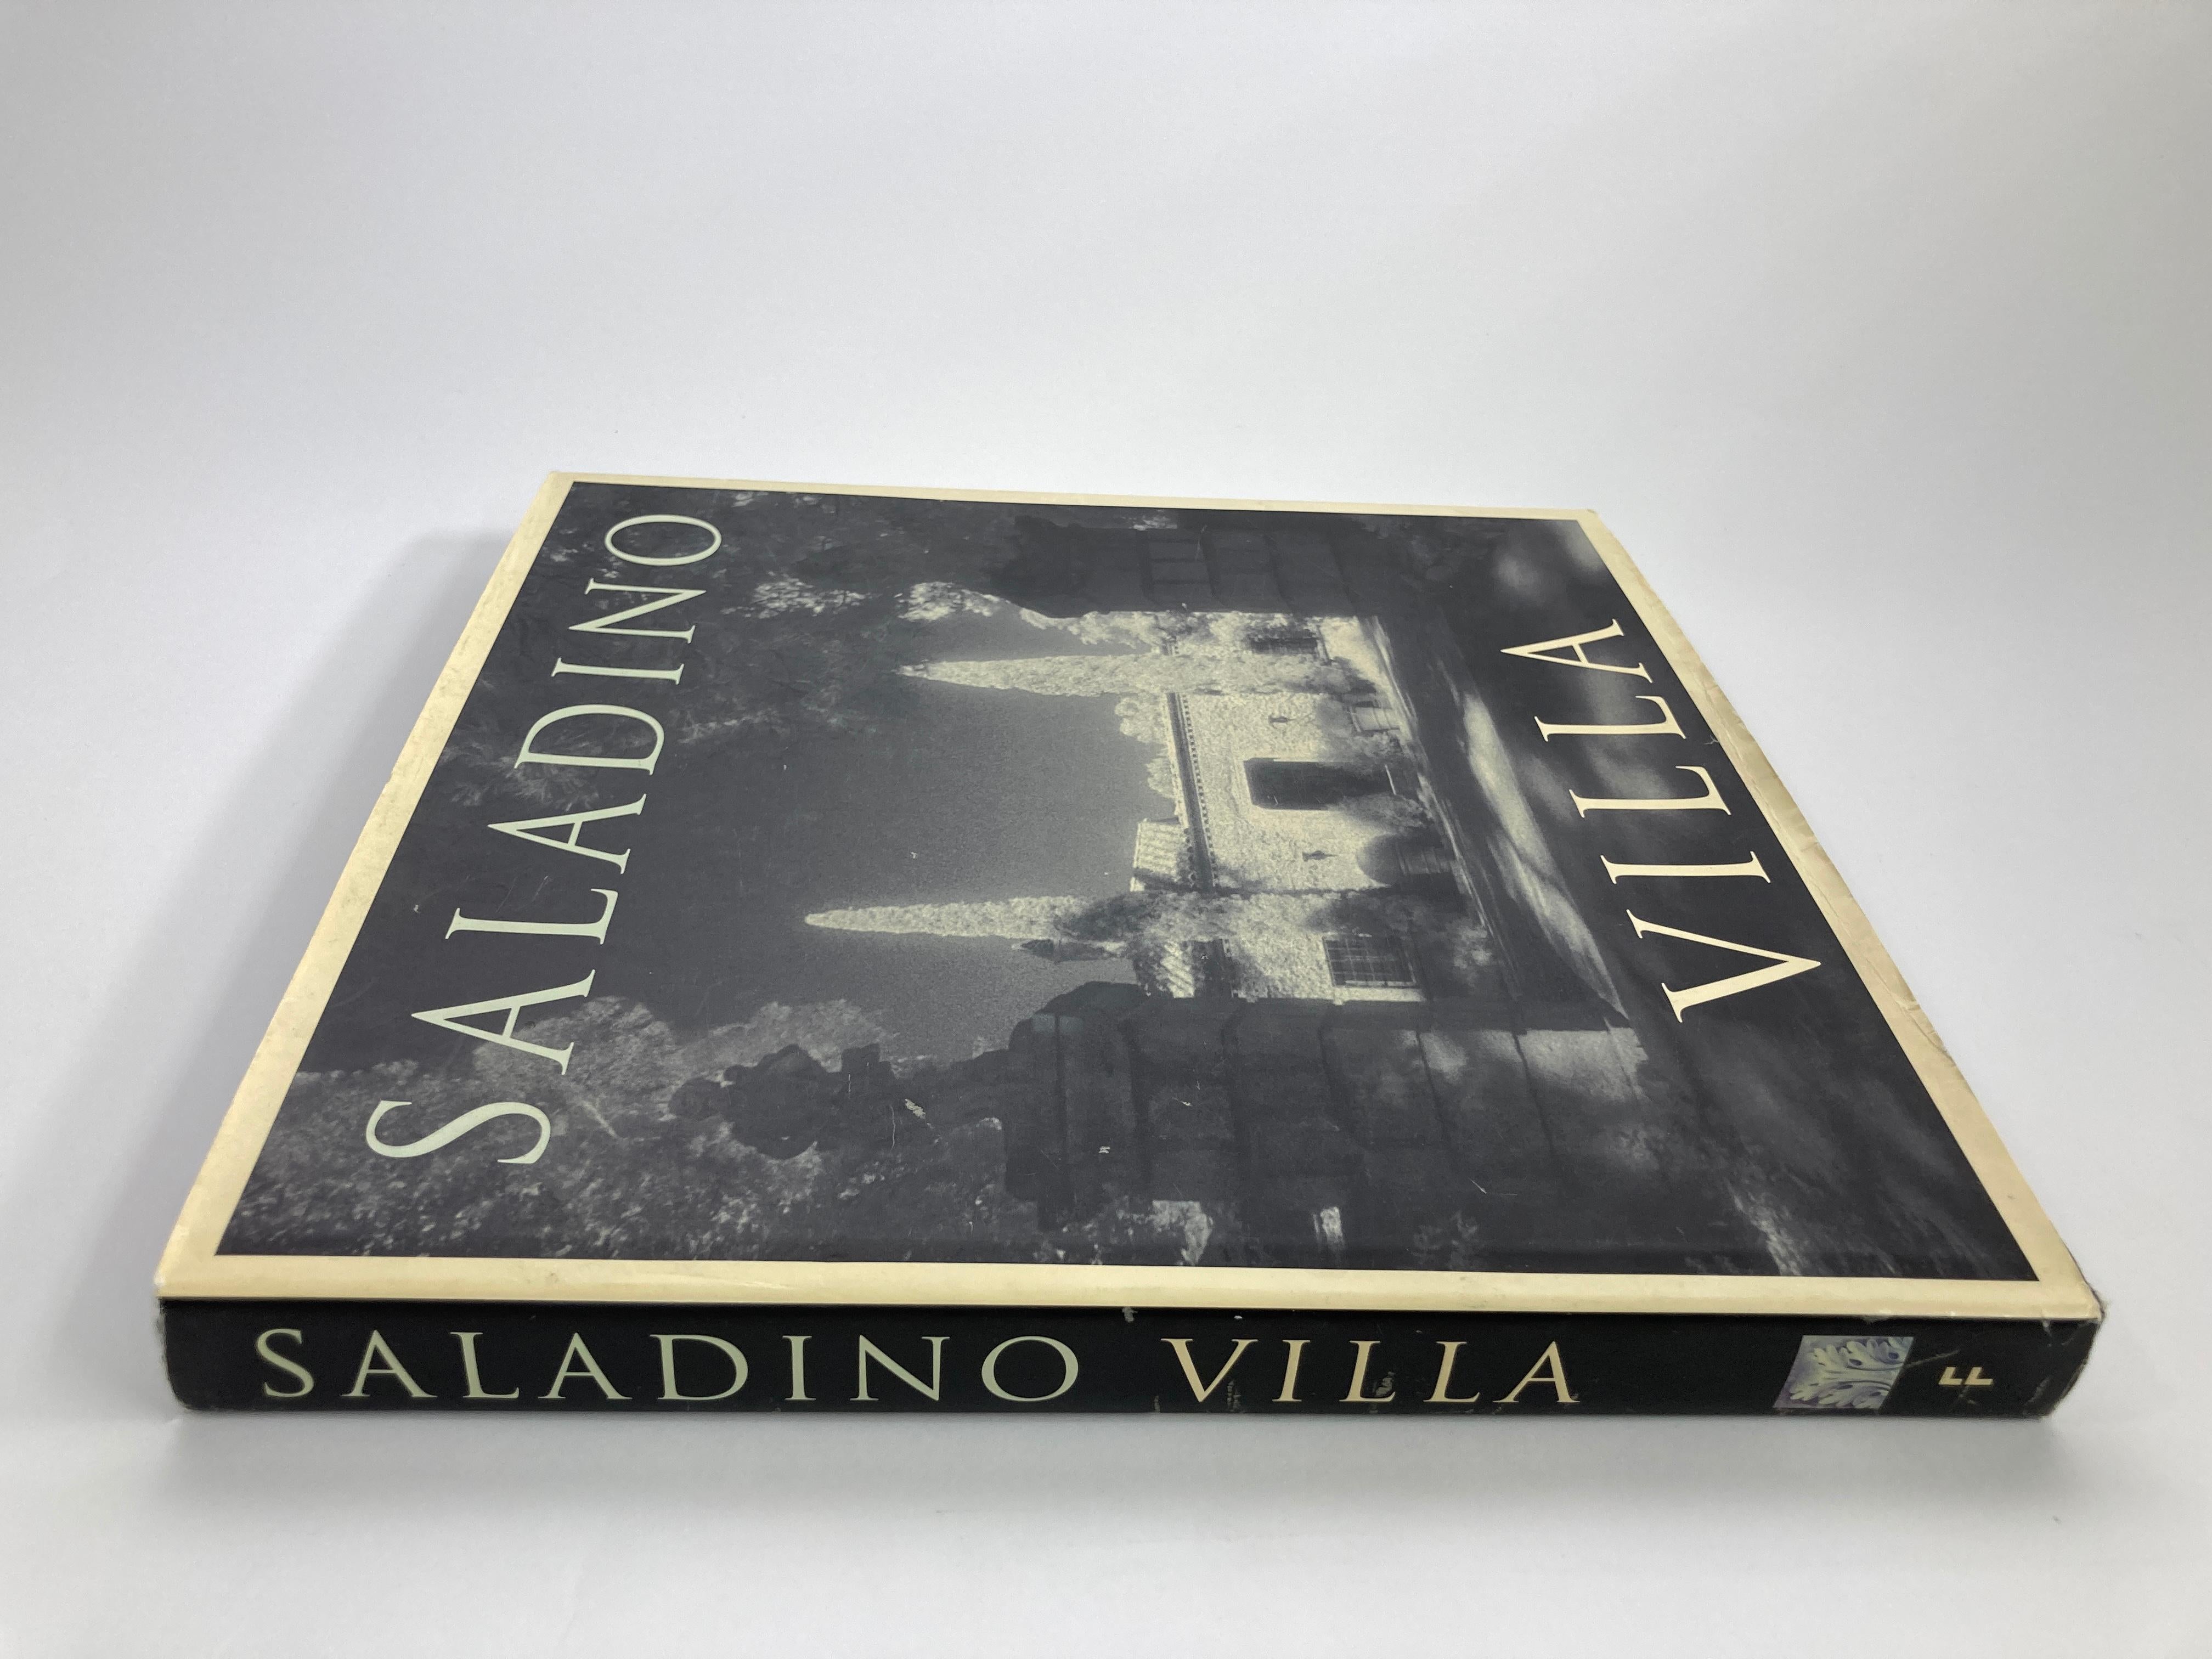 Villa By John Saladino hardcover large coffee table book.
The story of Saladino’s restoration of a stone house, originally designed by Wallace Frost, and its garden in California overlooking the Pacific. 
With sections on Architecture, Interiors,